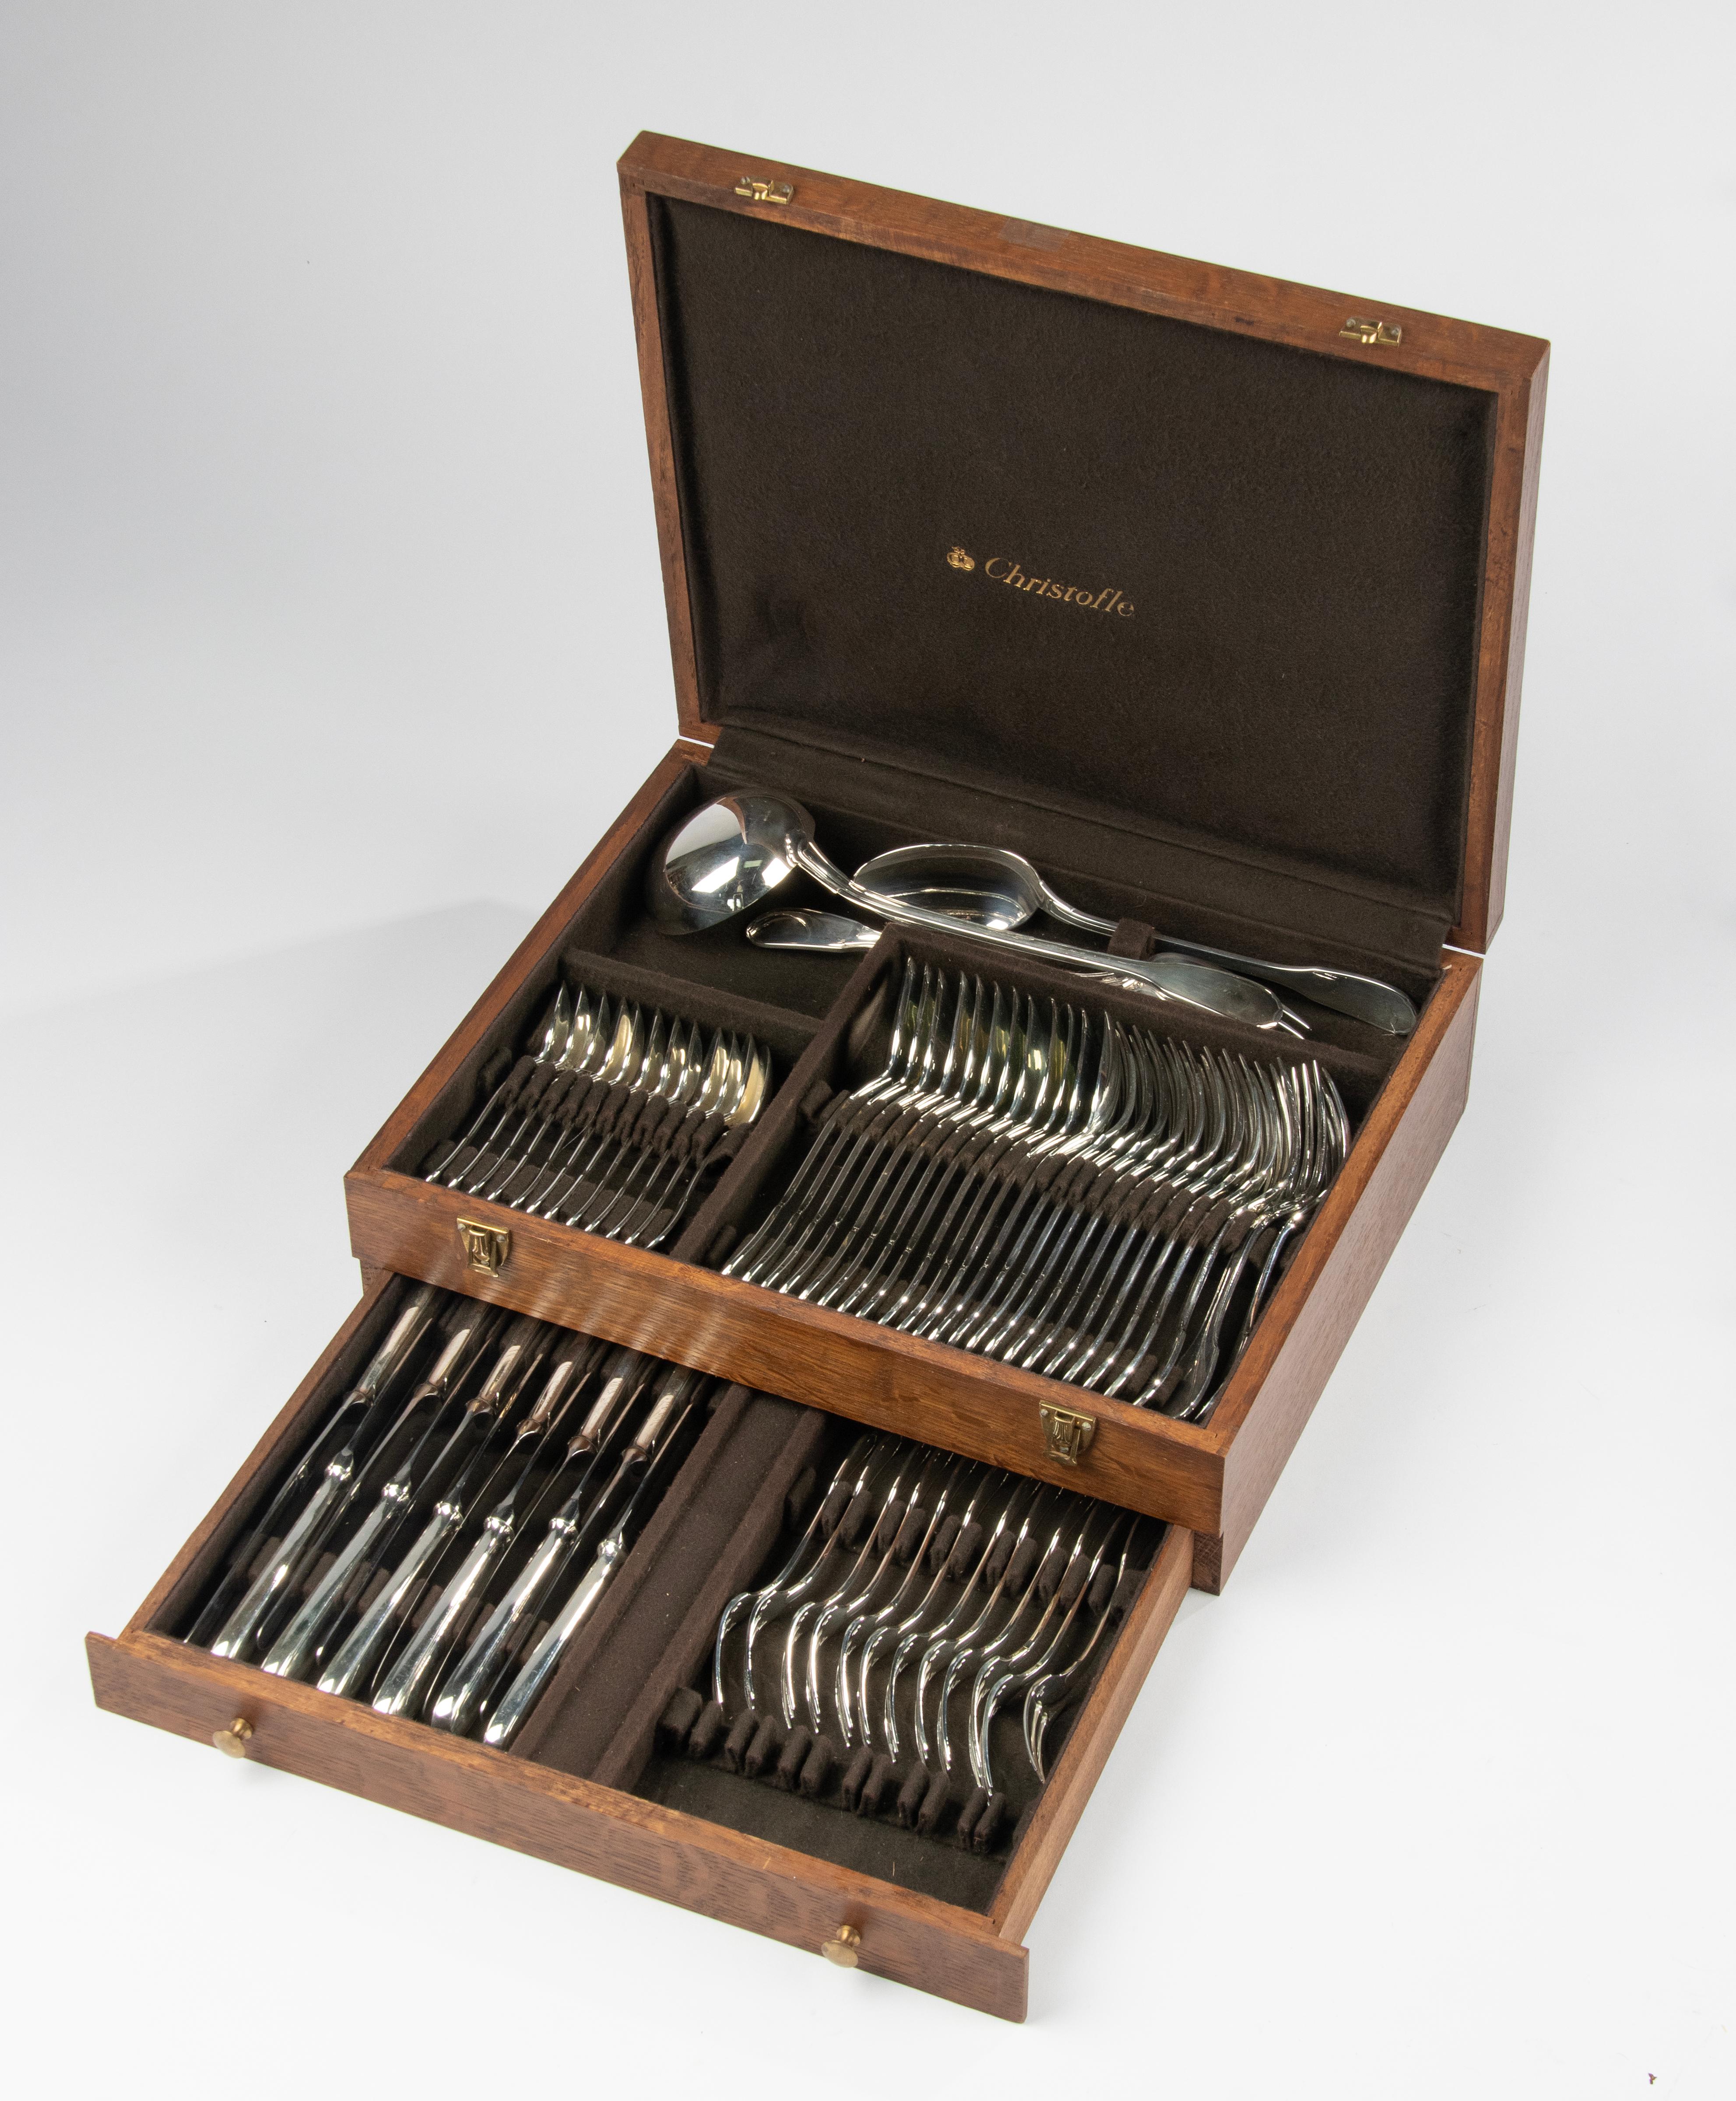 Silver Plate 63-Piece Set Silver-Plated Flatware Made by Christofle, Model Versailles